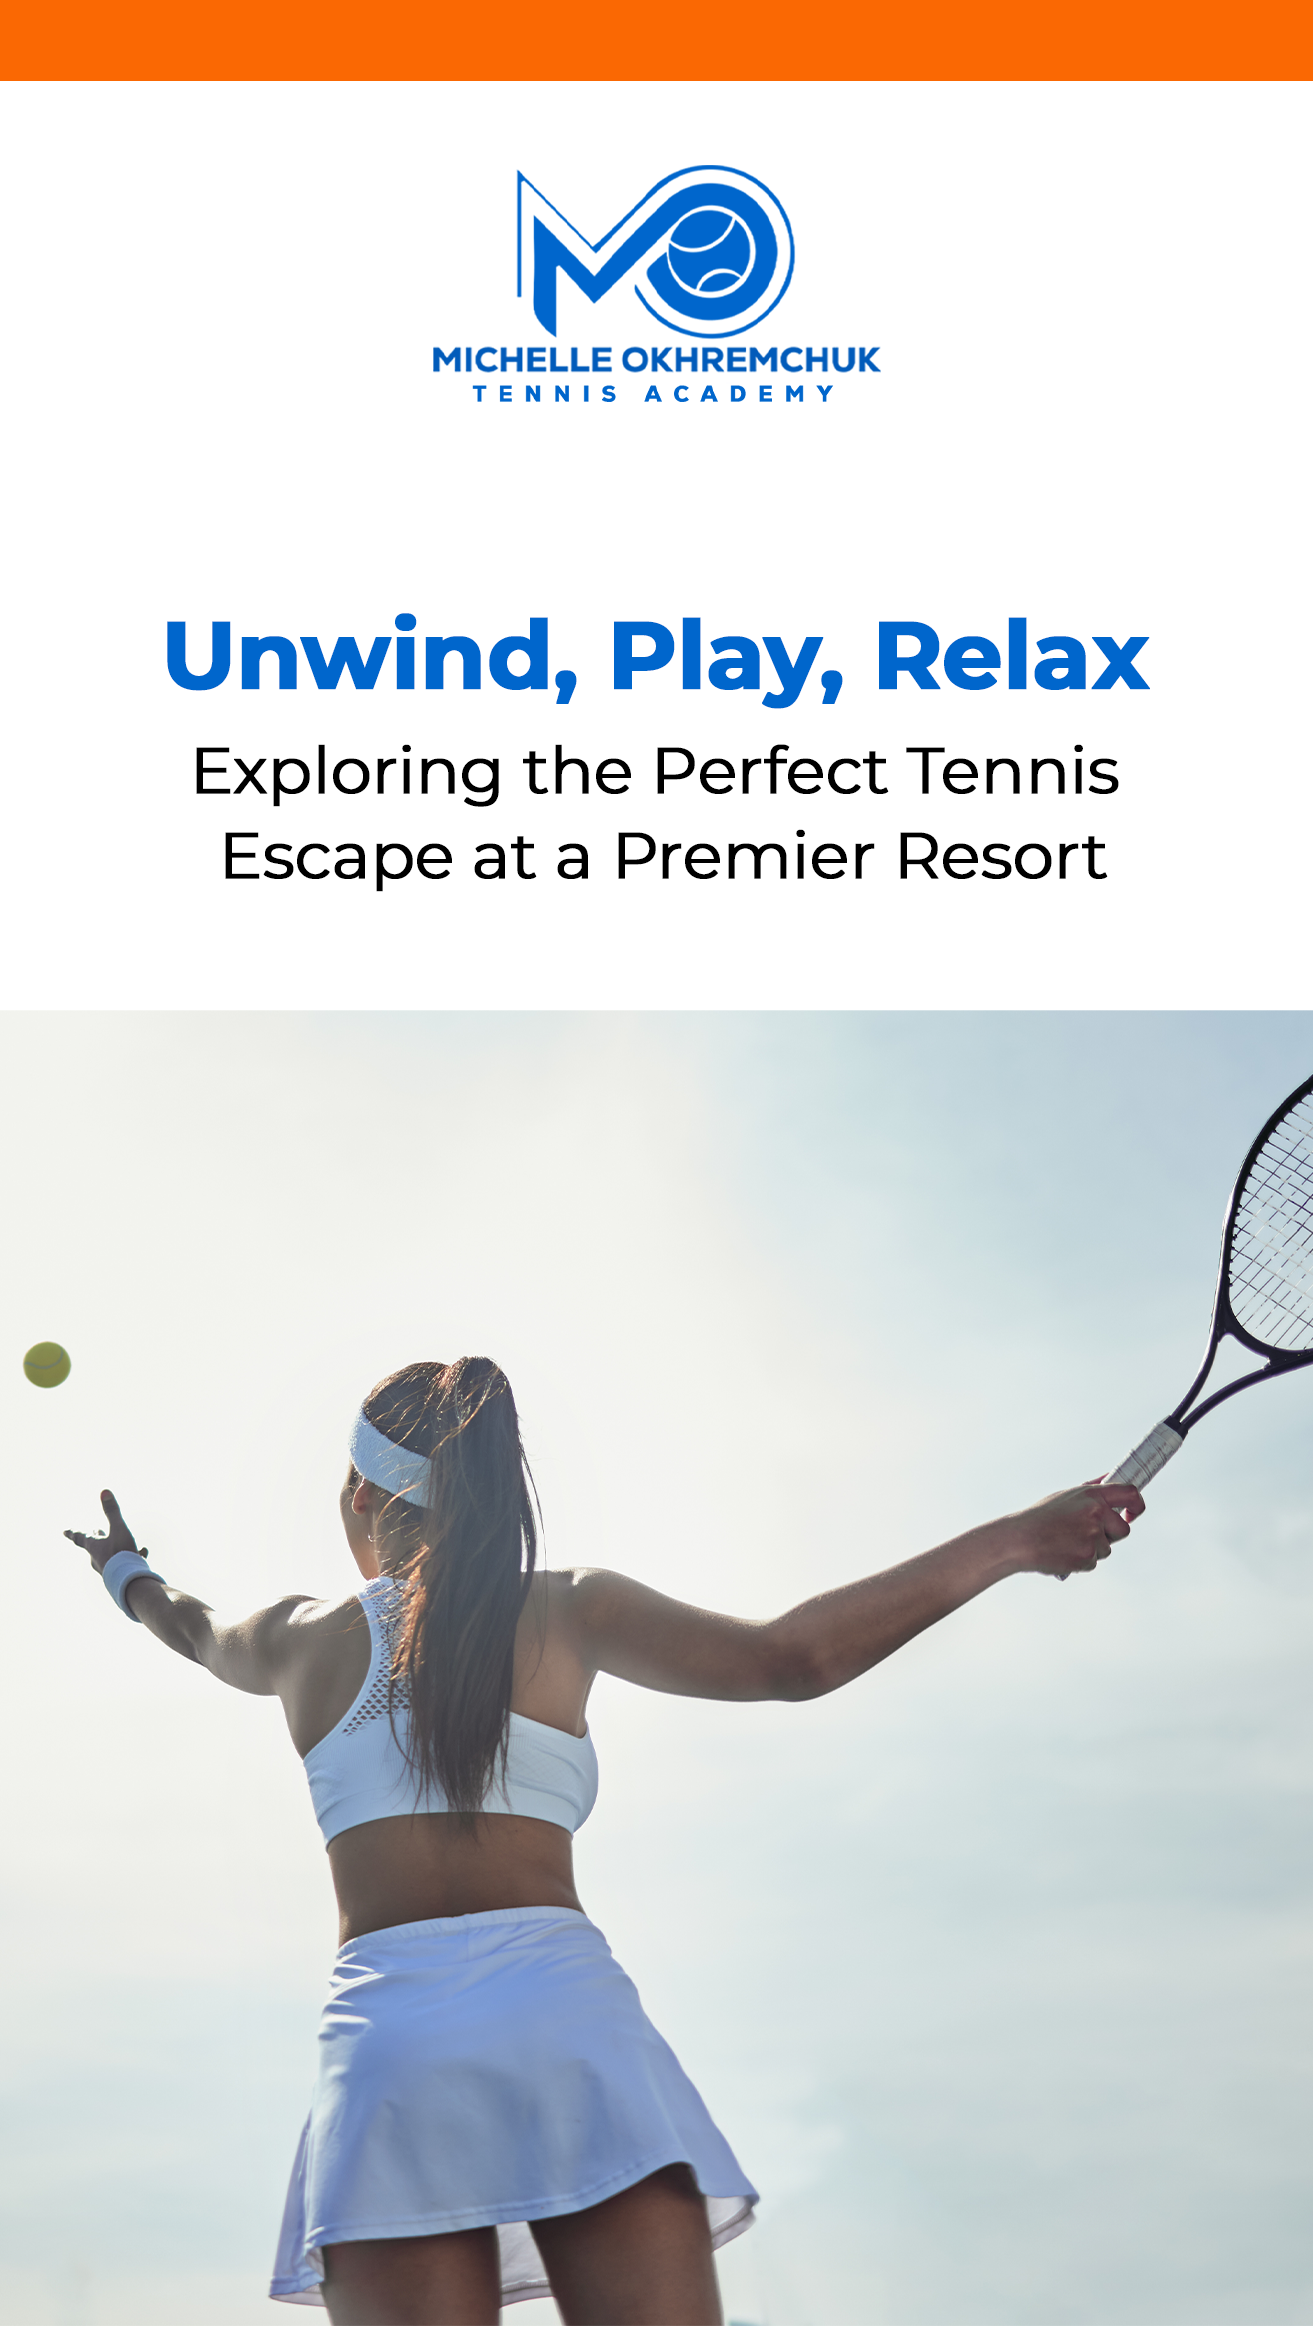 Unwind, Play, Relax: Exploring the Perfect Tennis Escape at a Premier Resort - Mo Tennis Training Academy